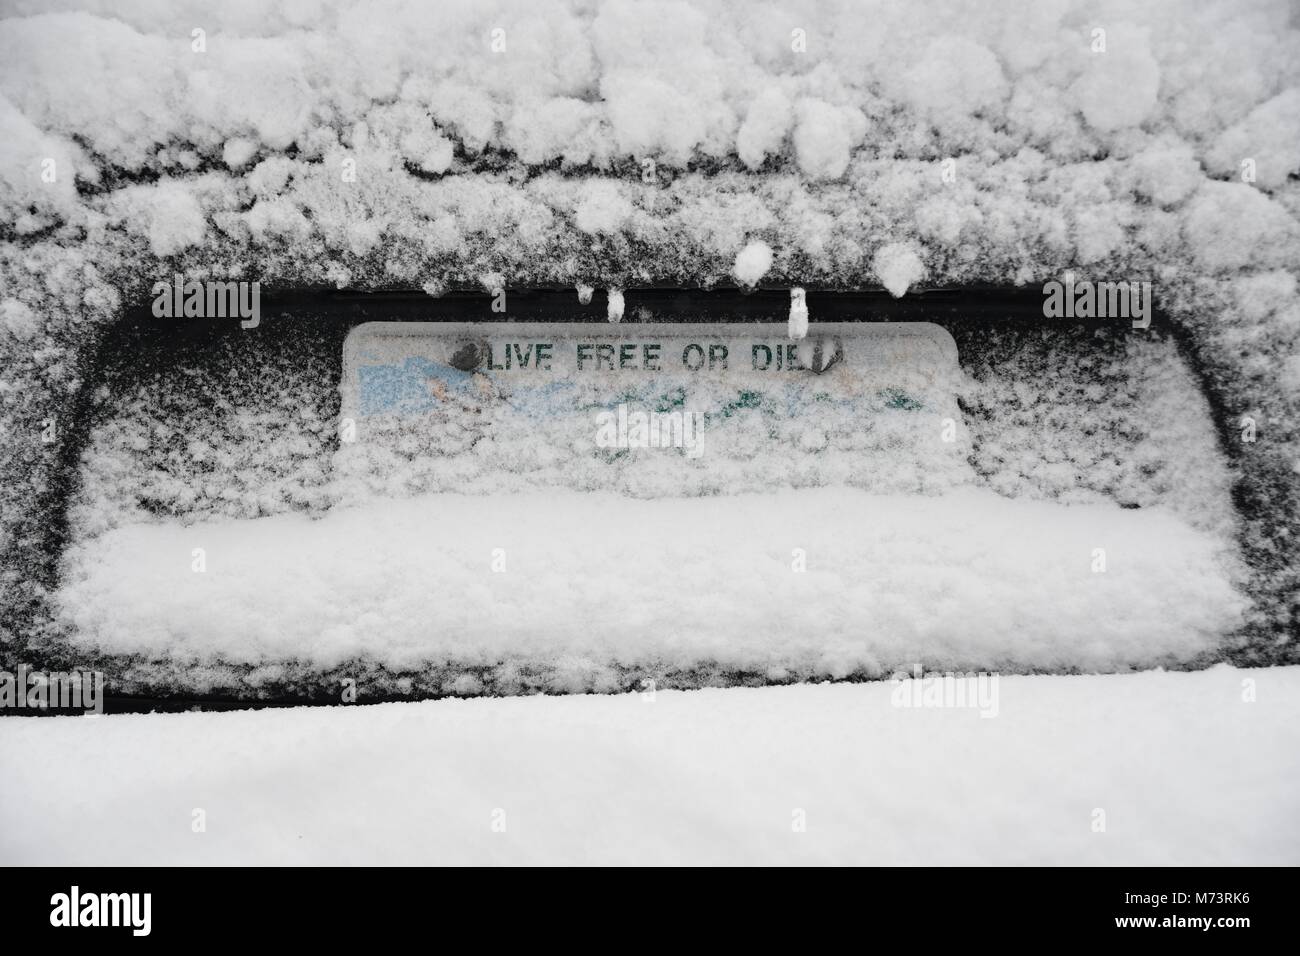 Bedford, N.H., USA, 7 March, 2018. A New Hampshire automobile license plate covered in snow from the recent storm. Credit: Andrew Cline/Alamy Live News Stock Photo